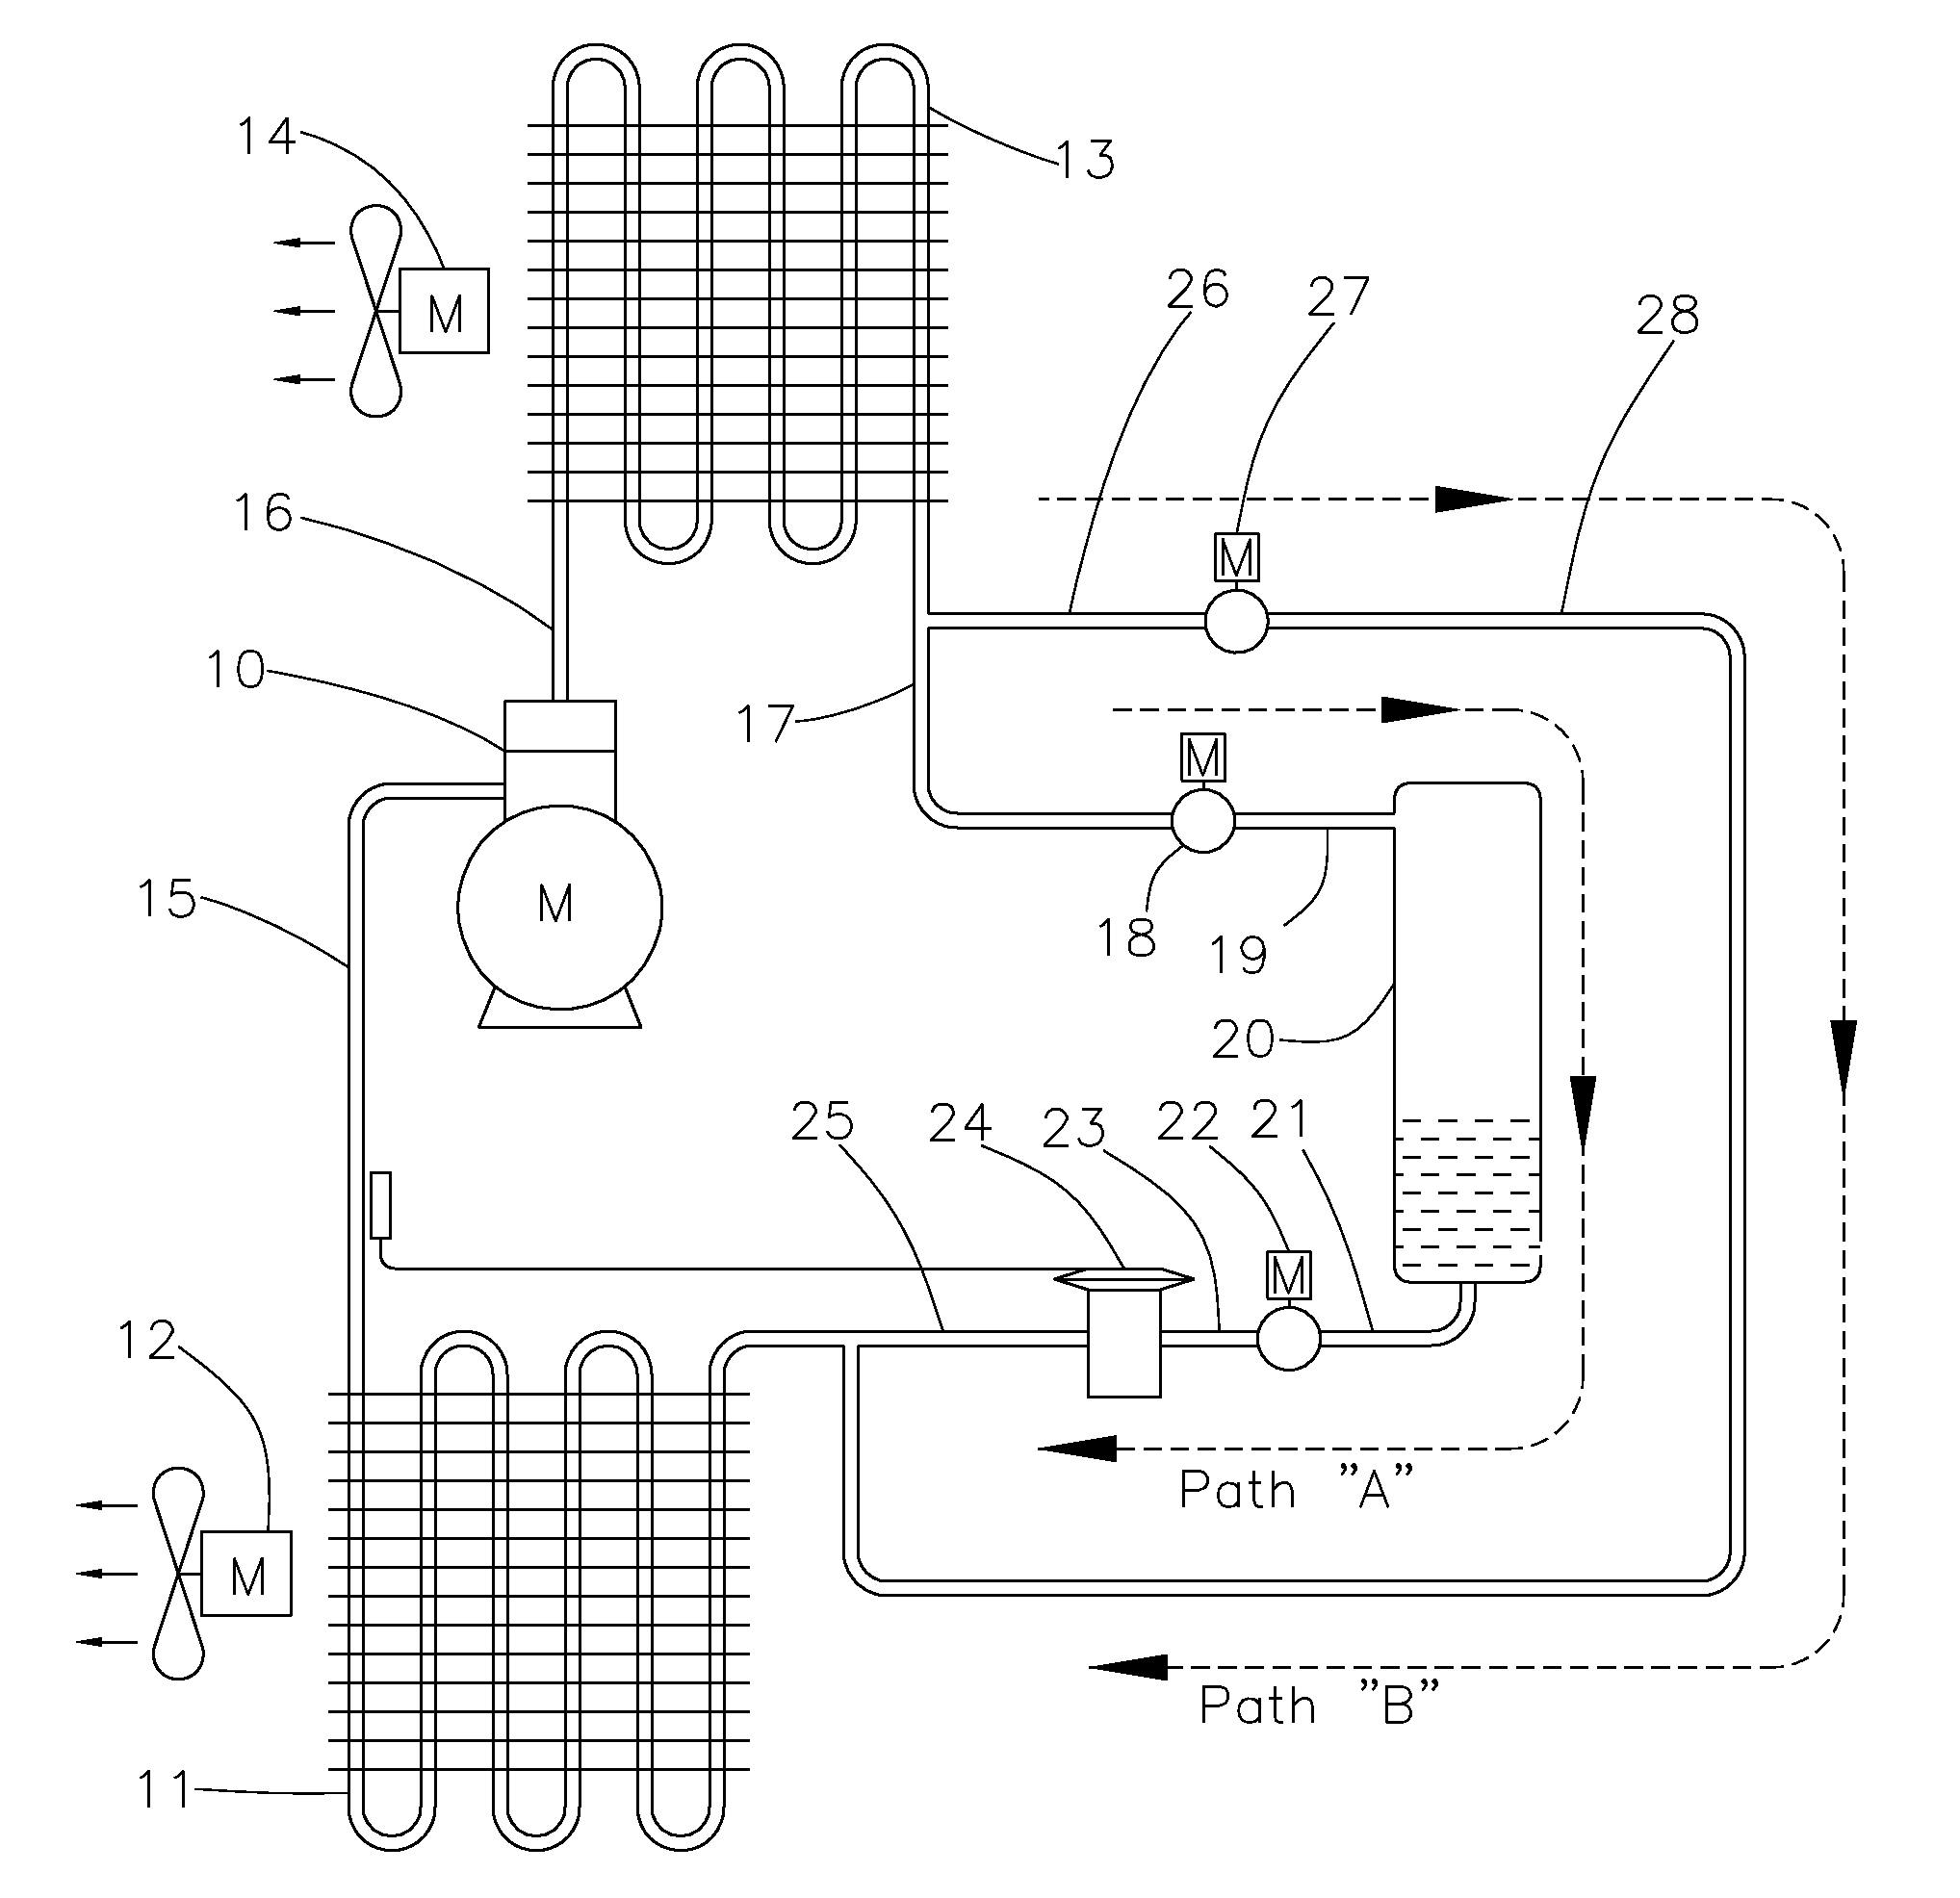 Systems and methods for defrosting an evaporator in a refrigeration system